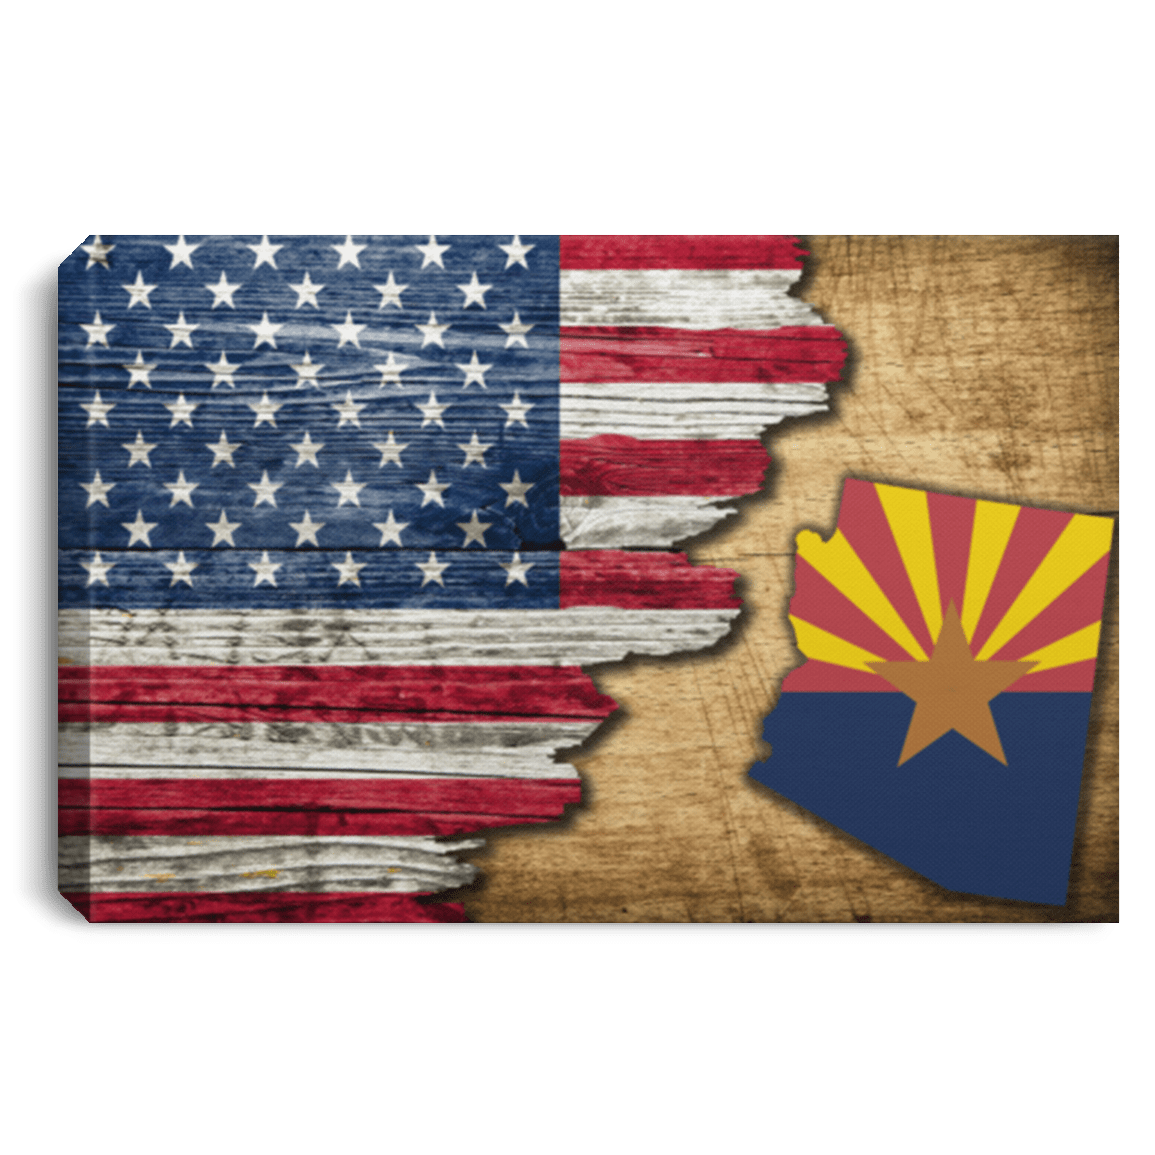 United States/Arizona Flag Ripped Effect 18X12 Inches Landscape Canvas .75In Frame